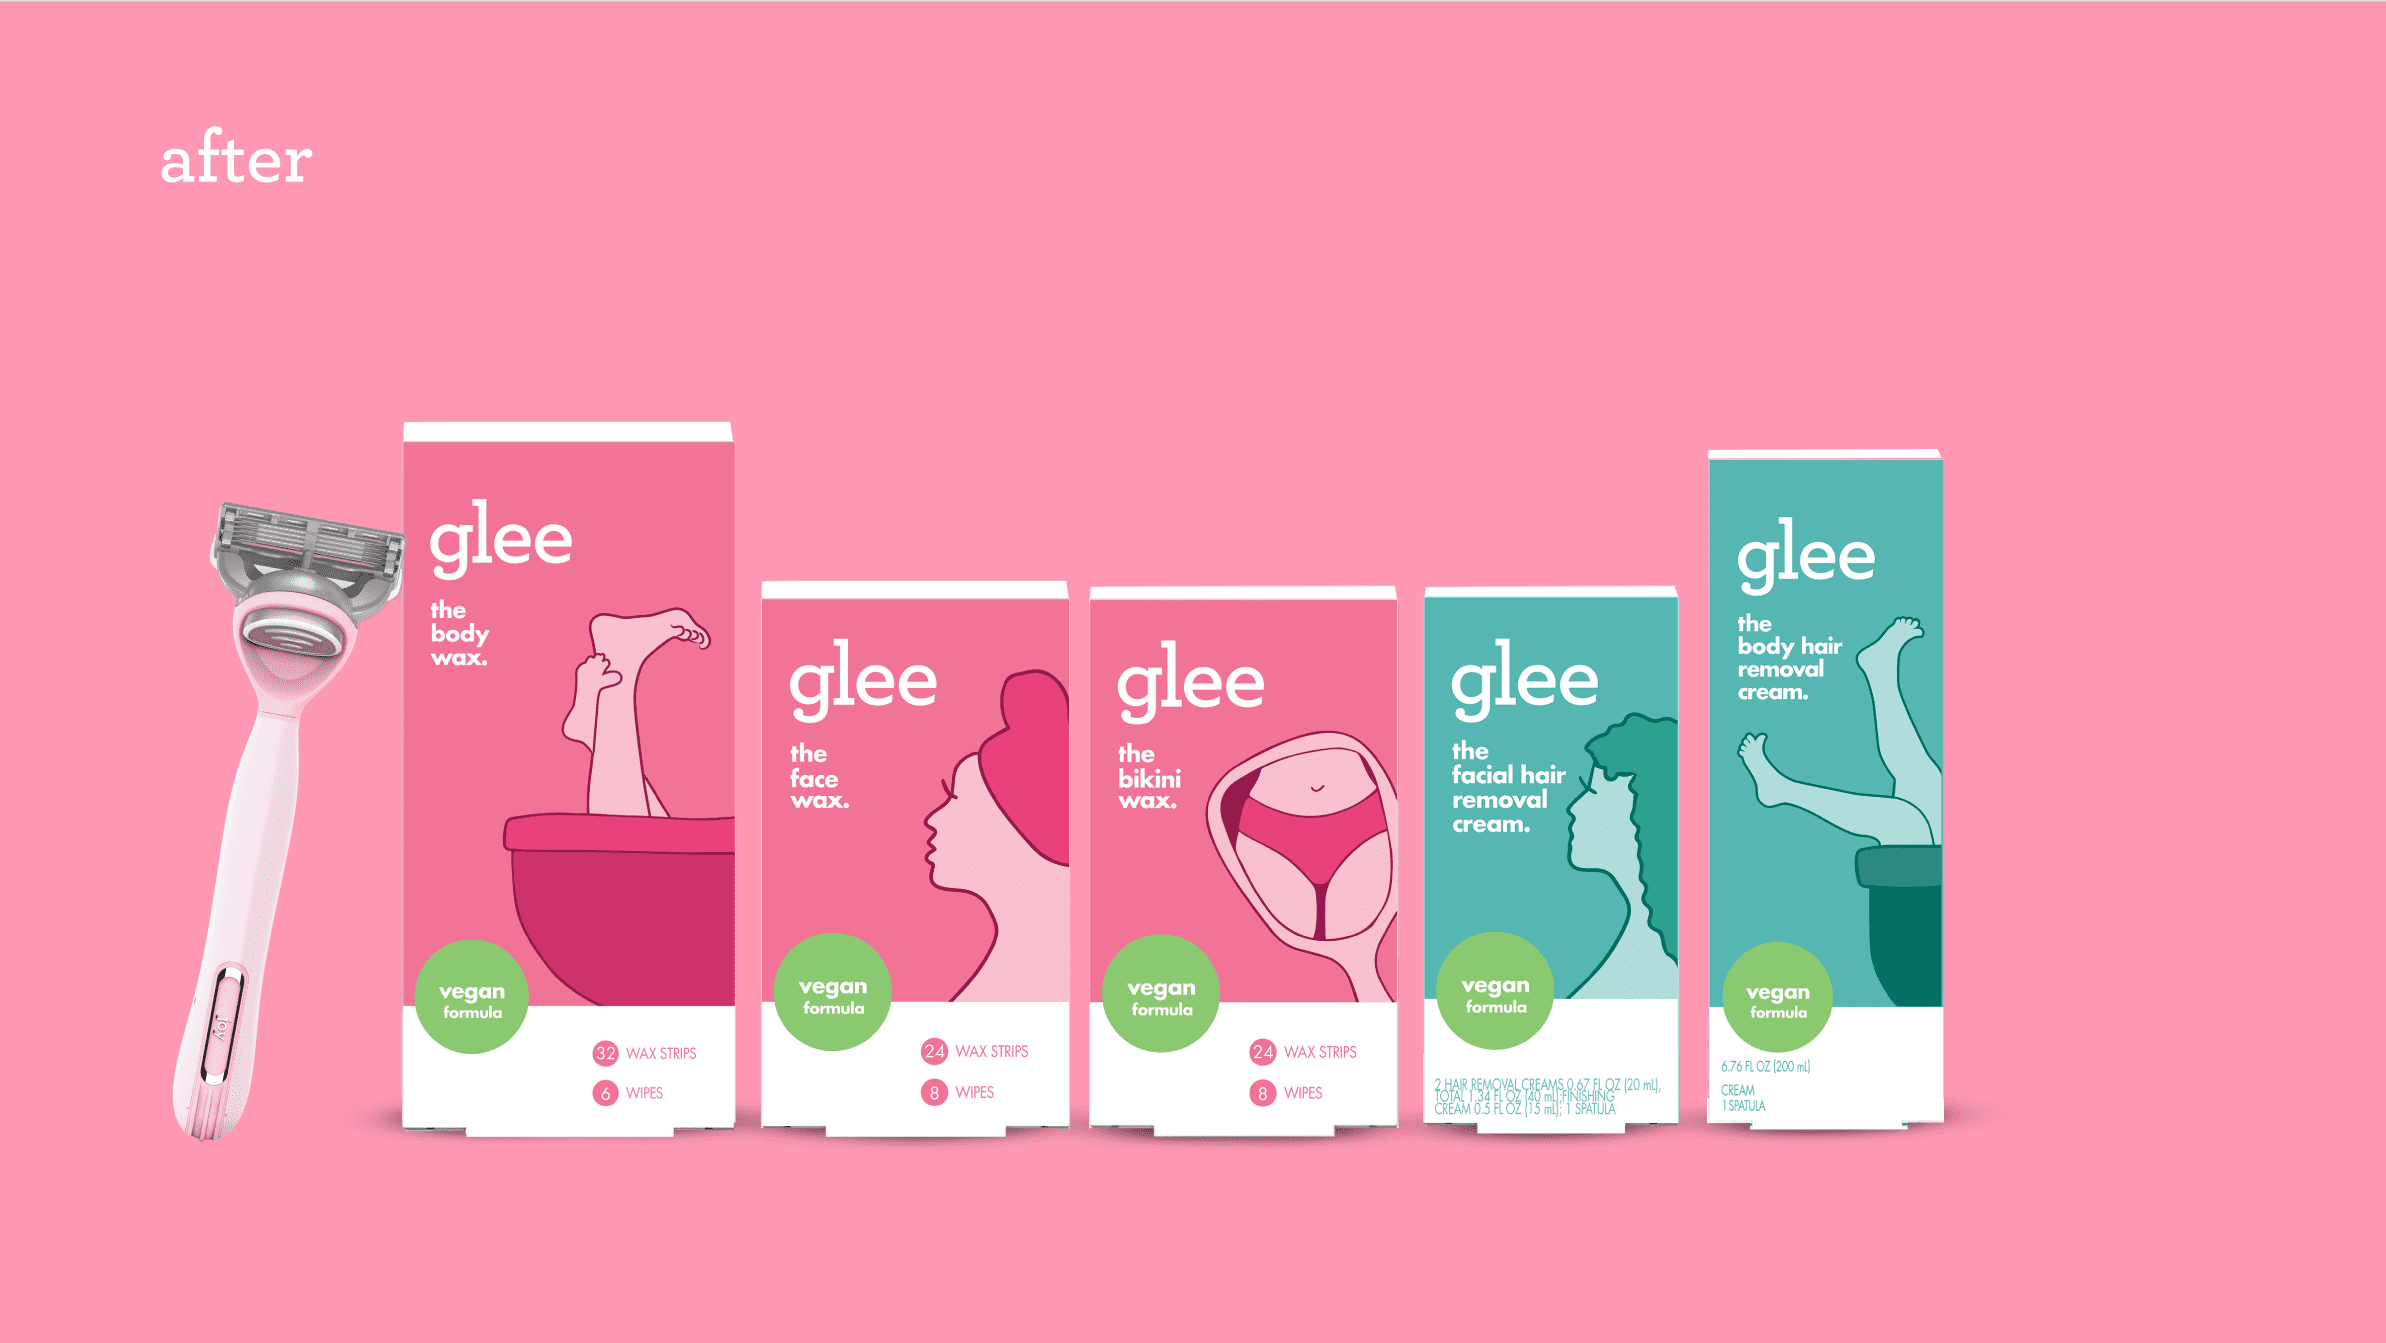 Photograph of a razor and five products from the Gillette Joy Glee product line of waxes and hair removal creams, showing the new packaging design after the brand refresh done by a product packaging design agency.